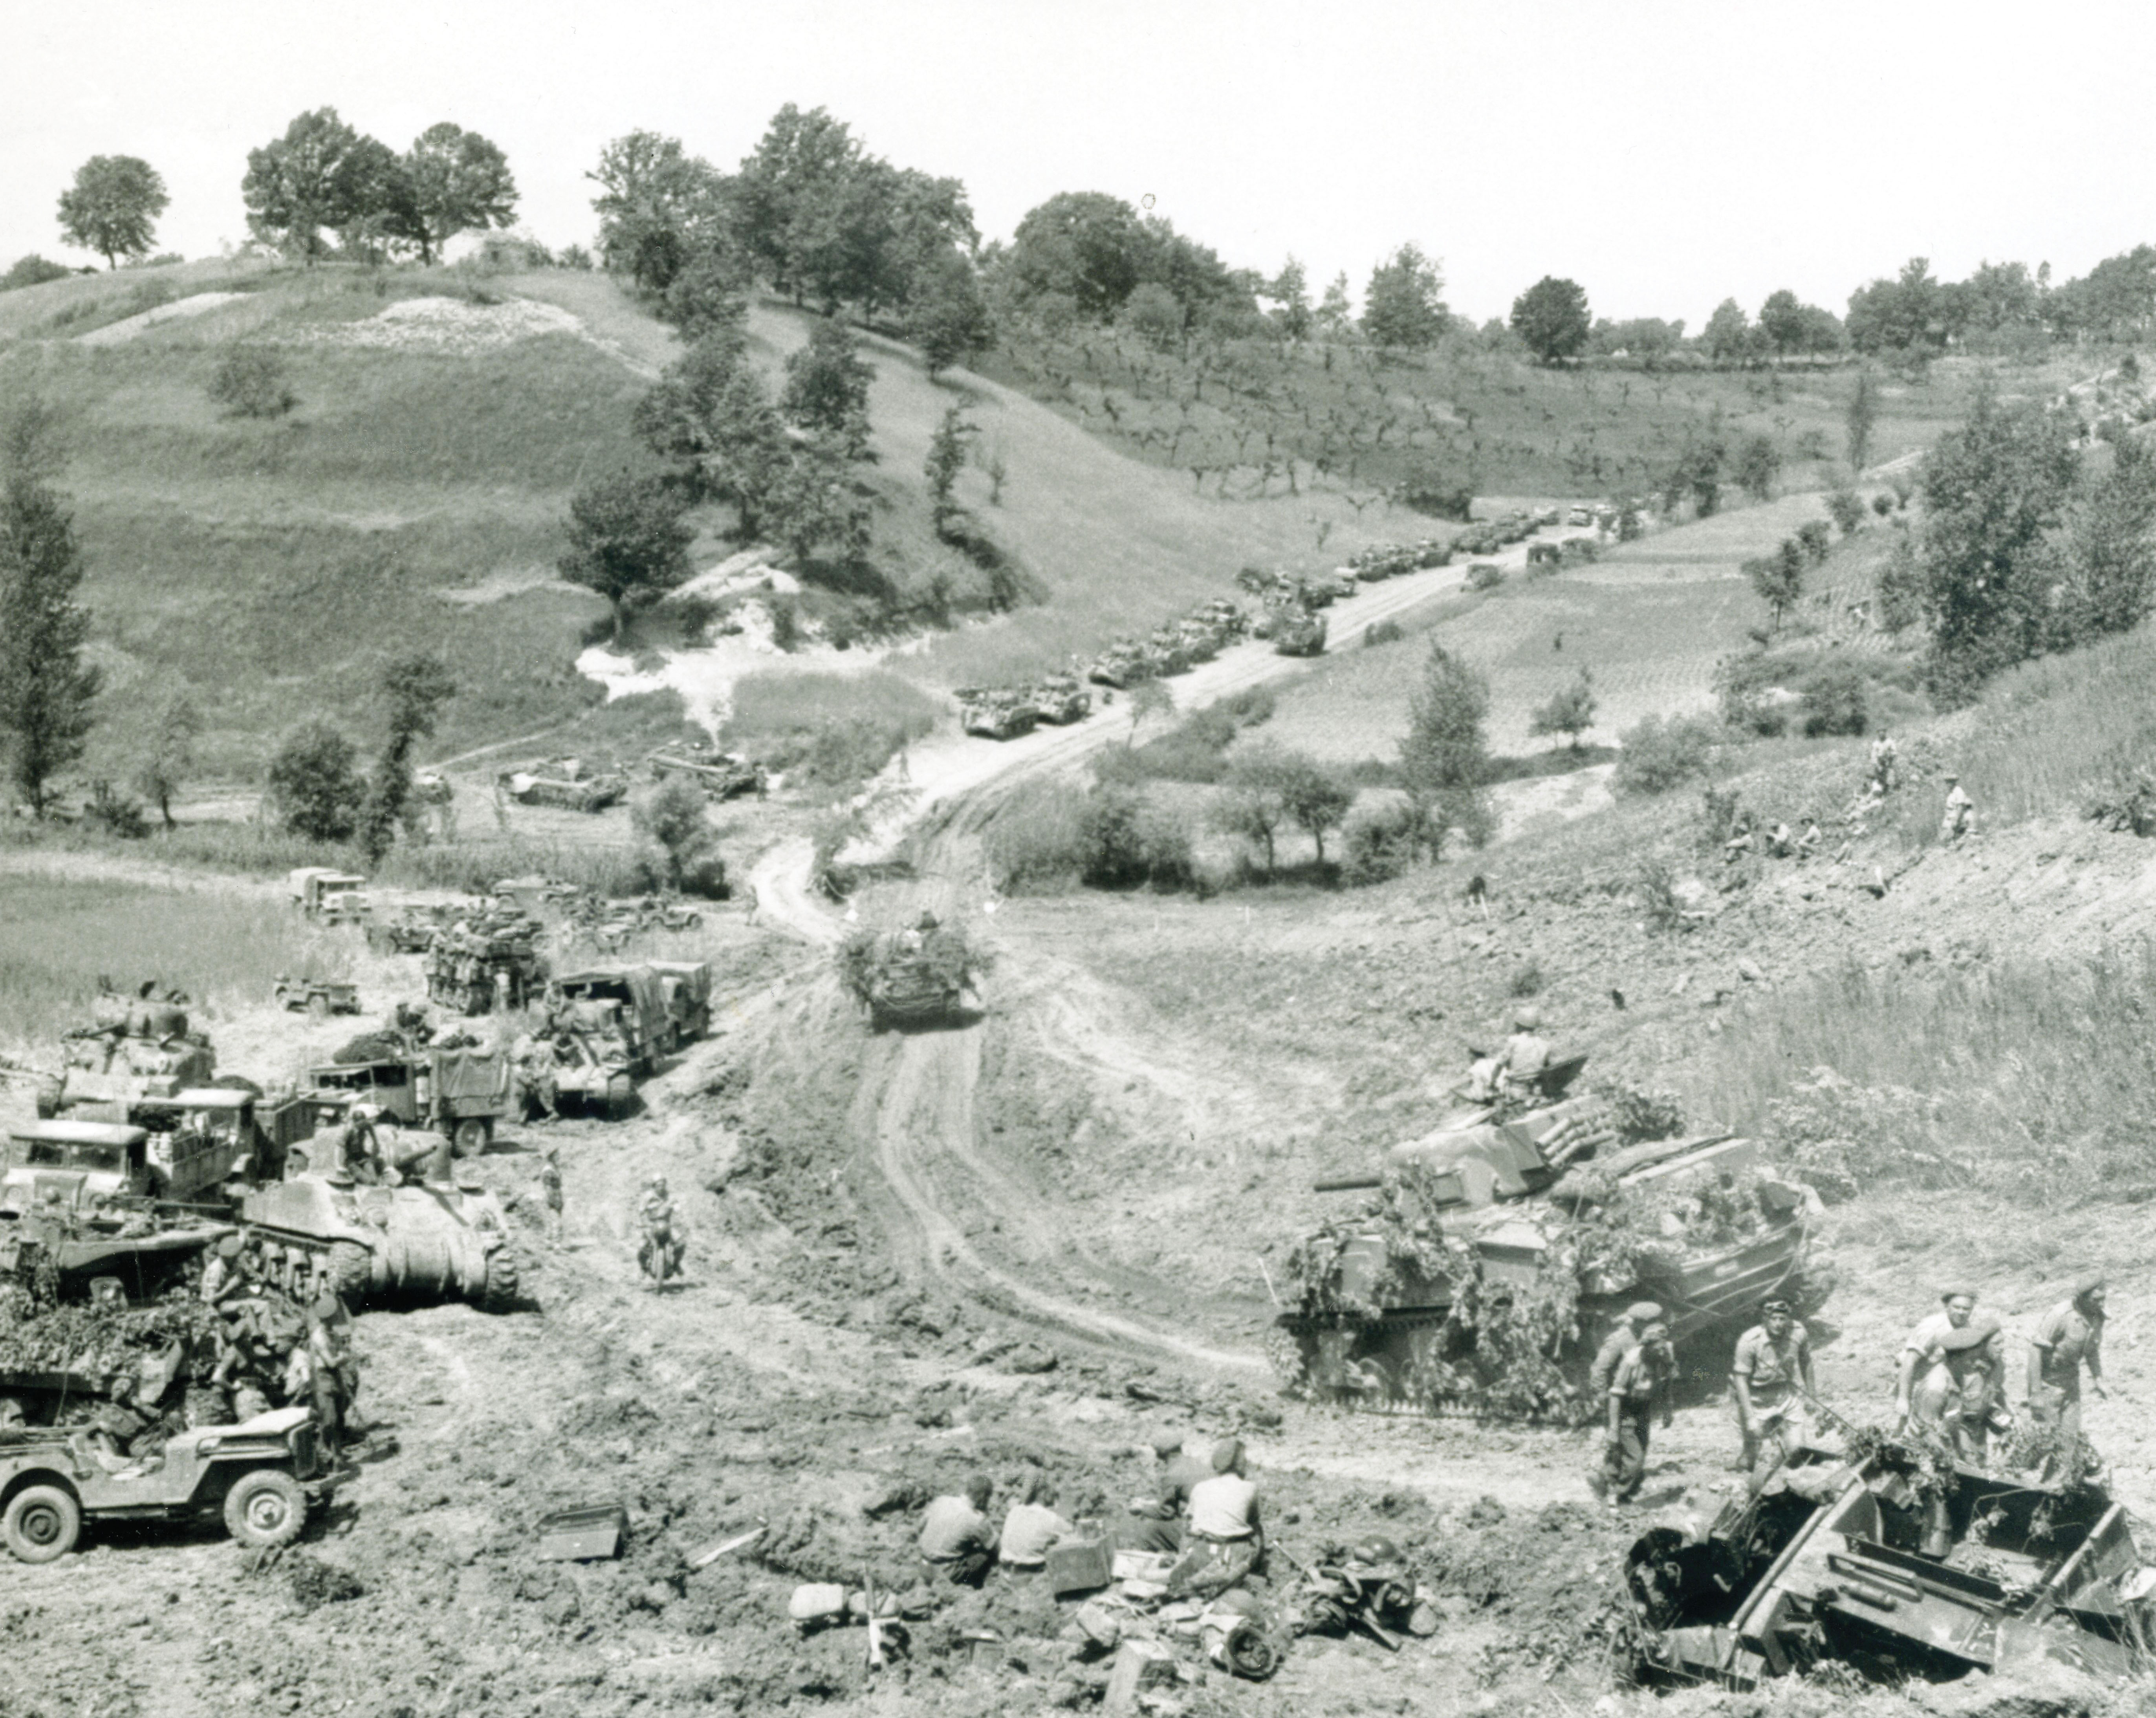 Canadian forces advancing from the Gustav Line to the Hitler Line – carrier in the foreground coming up steep hill with tanks in background – Sherman in foreground is hung up on the edge. 24 May 1944, Liri Valley, Italy